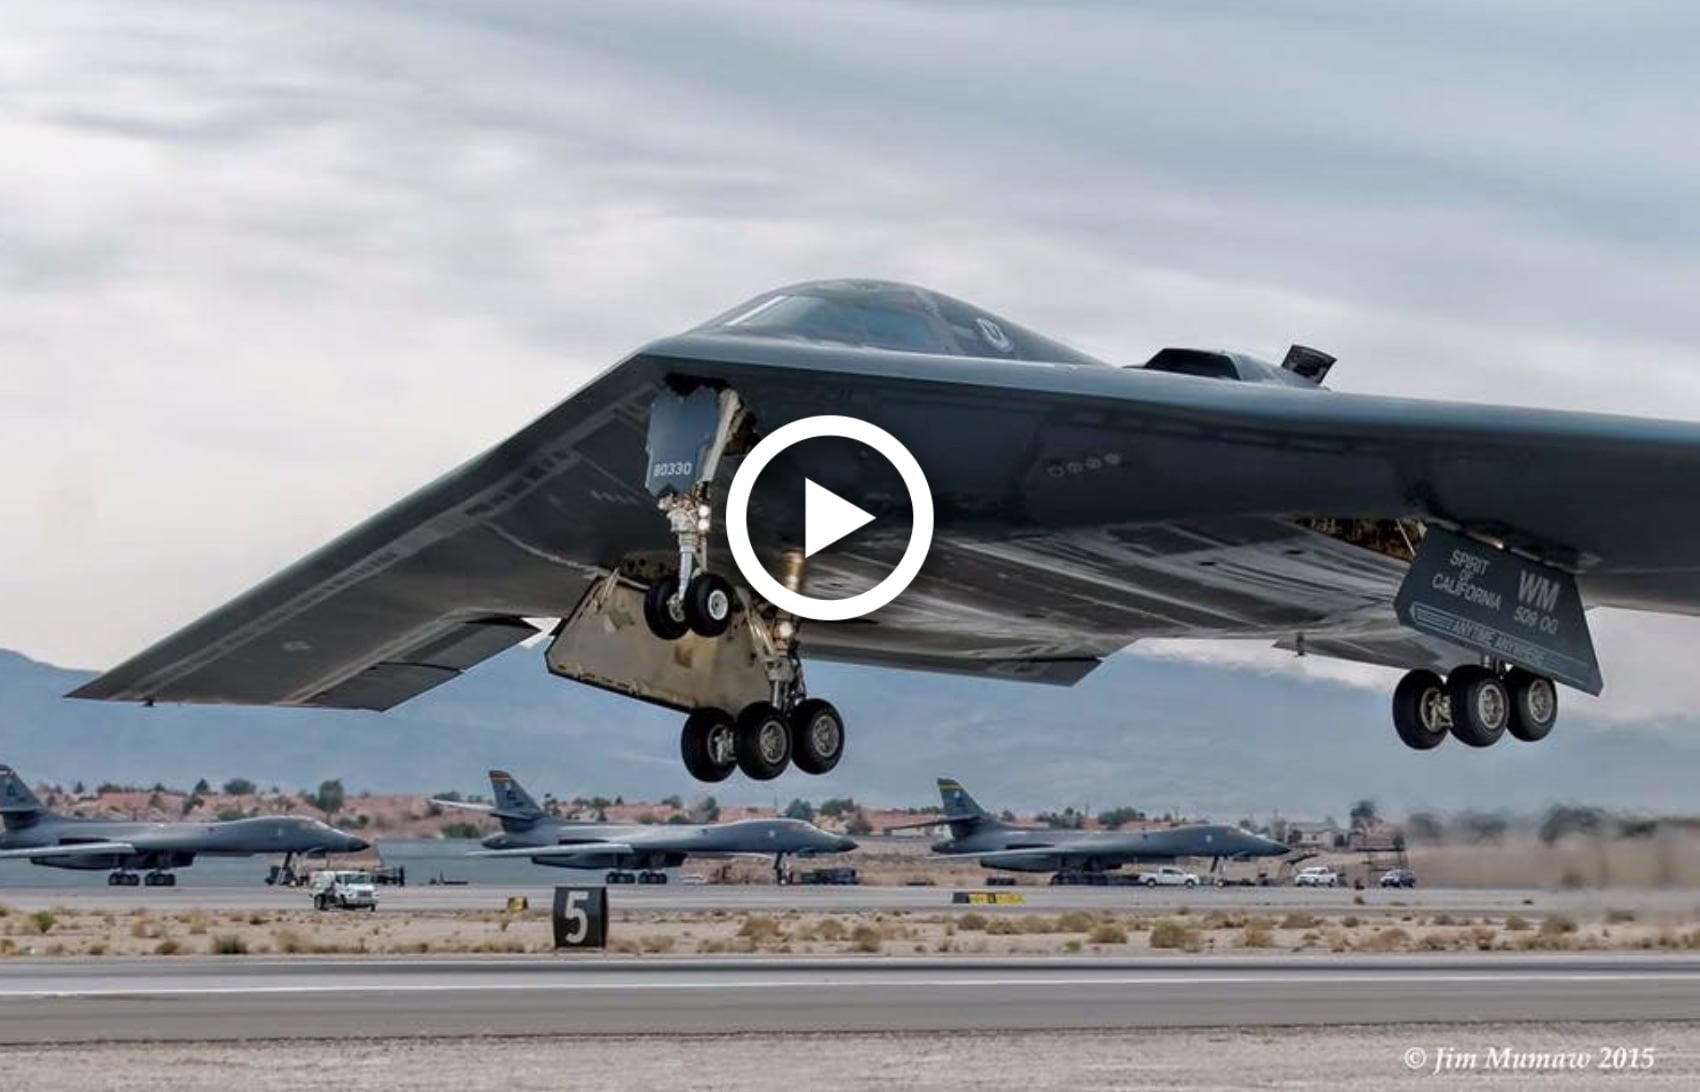 Rare B-2 Bomber Footage Captures The Beauty of the Sleek Stealth Bomber